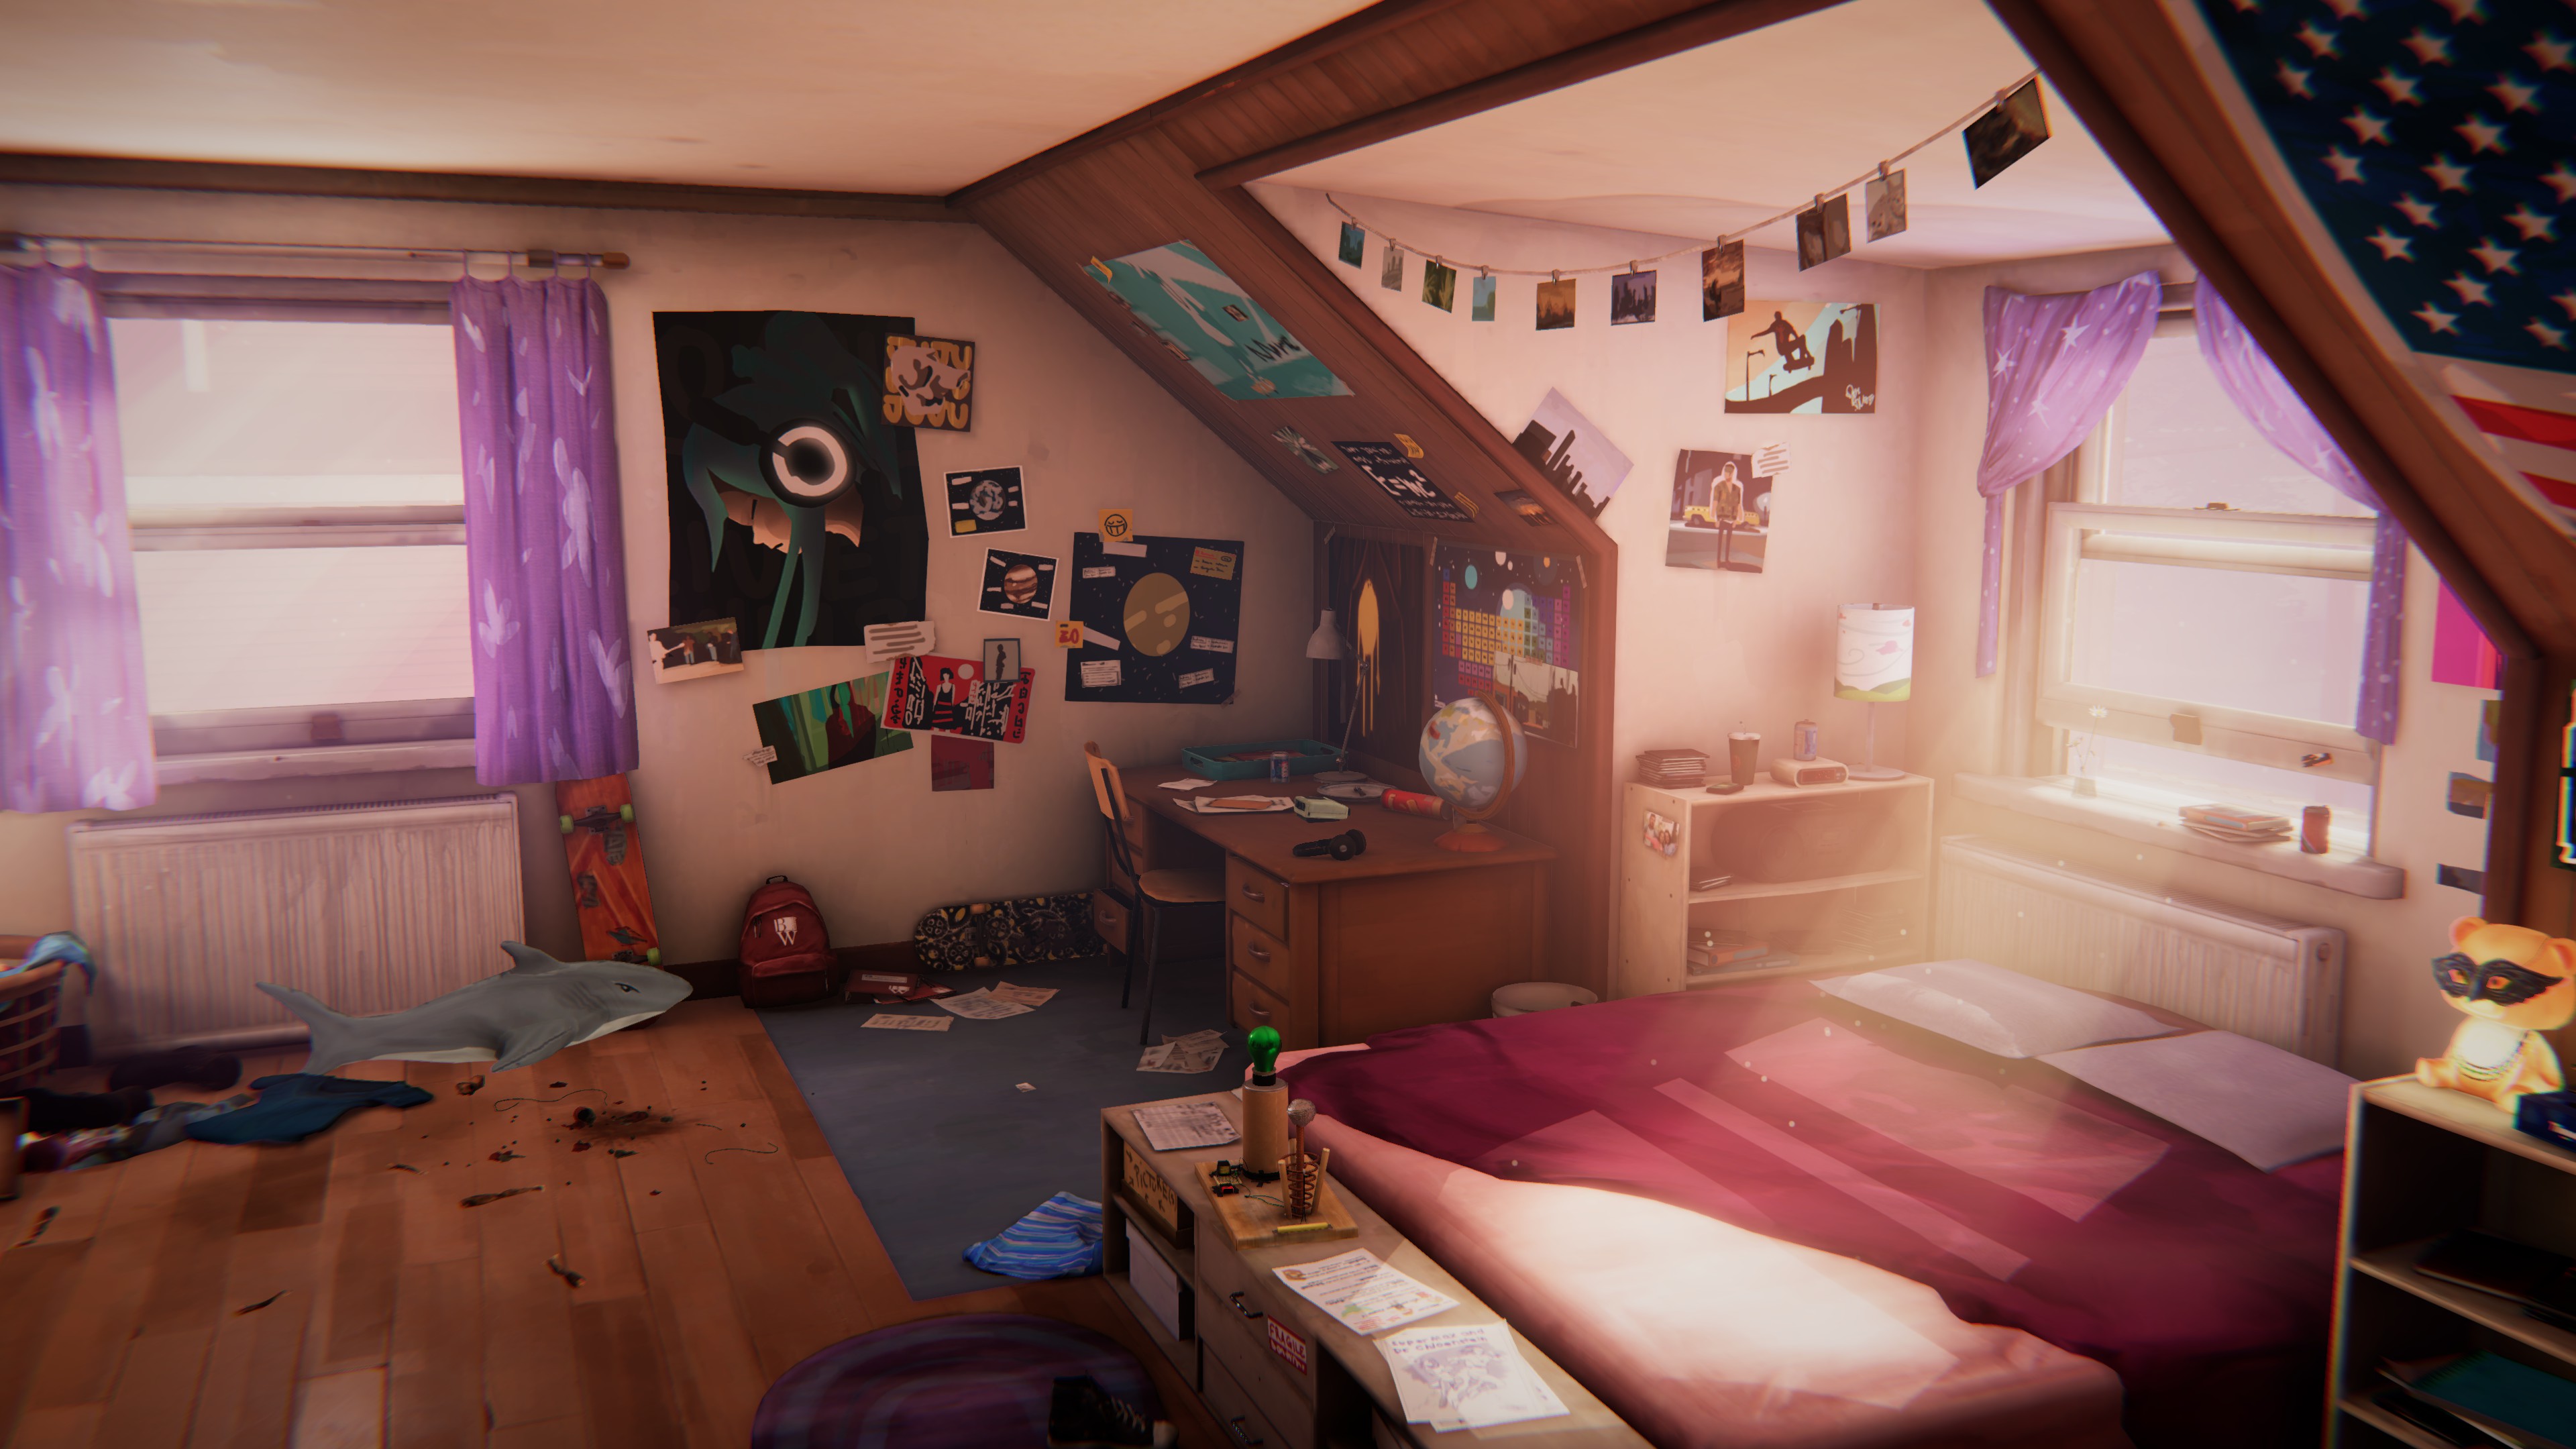 General 3840x2160 Life Is Strange Life is Strange Before the Storm video games PC gaming screen shot interior room